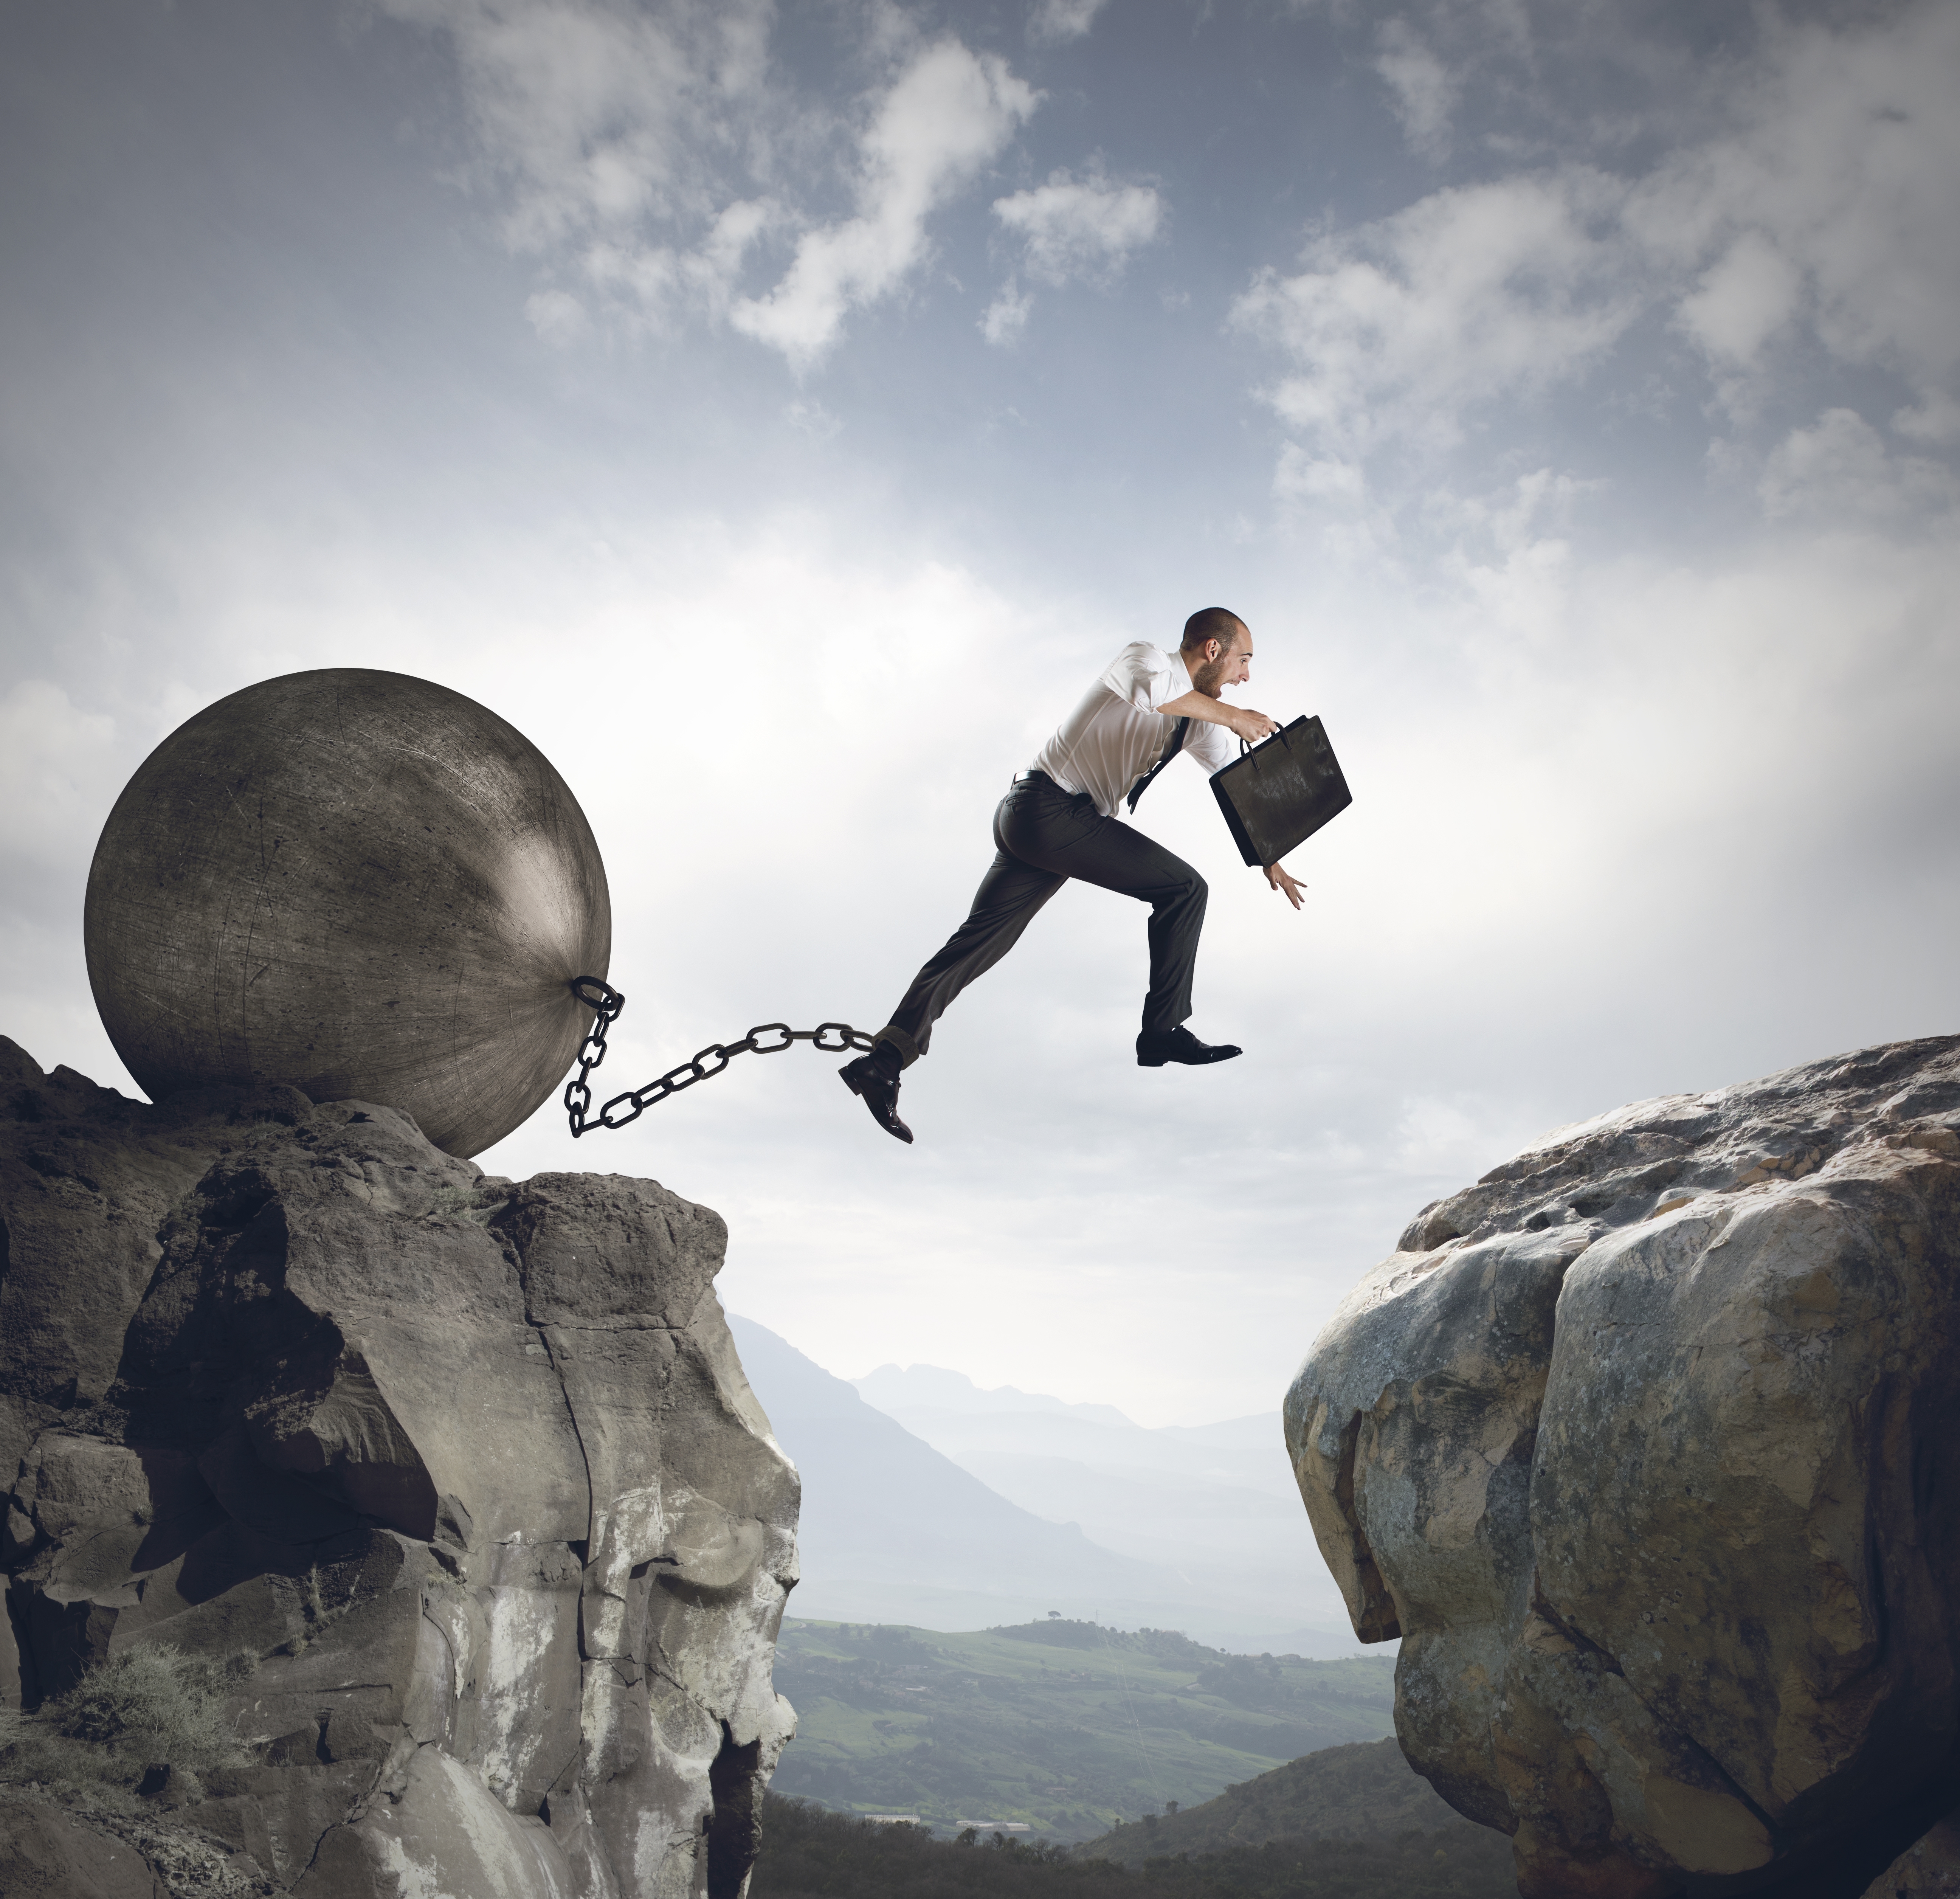 Business man with ball and chain attached to ankle jumping over large mountainous gap